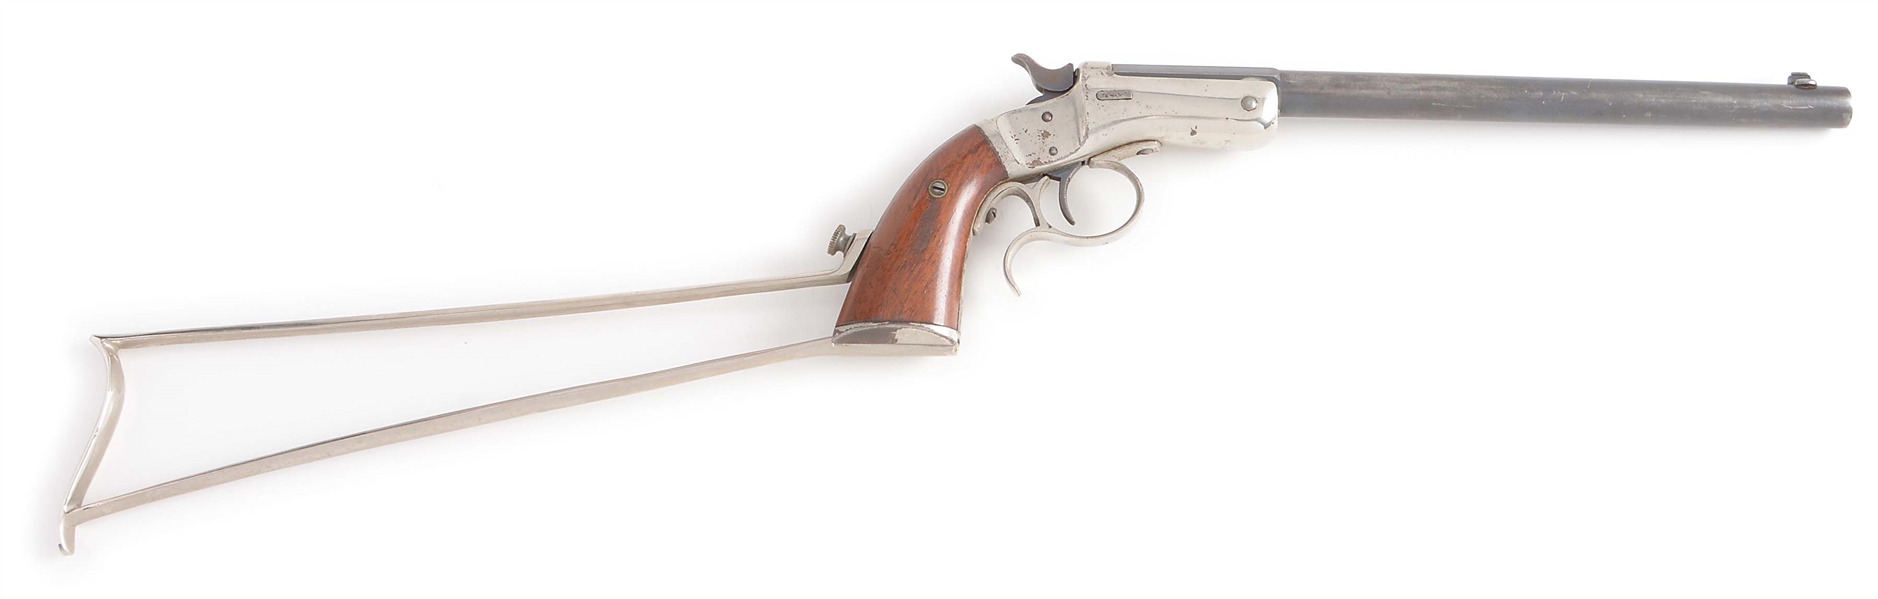 (C) STEVENS NEW MODEL NO. 40 POCKET RIFLE WITH STOCK.